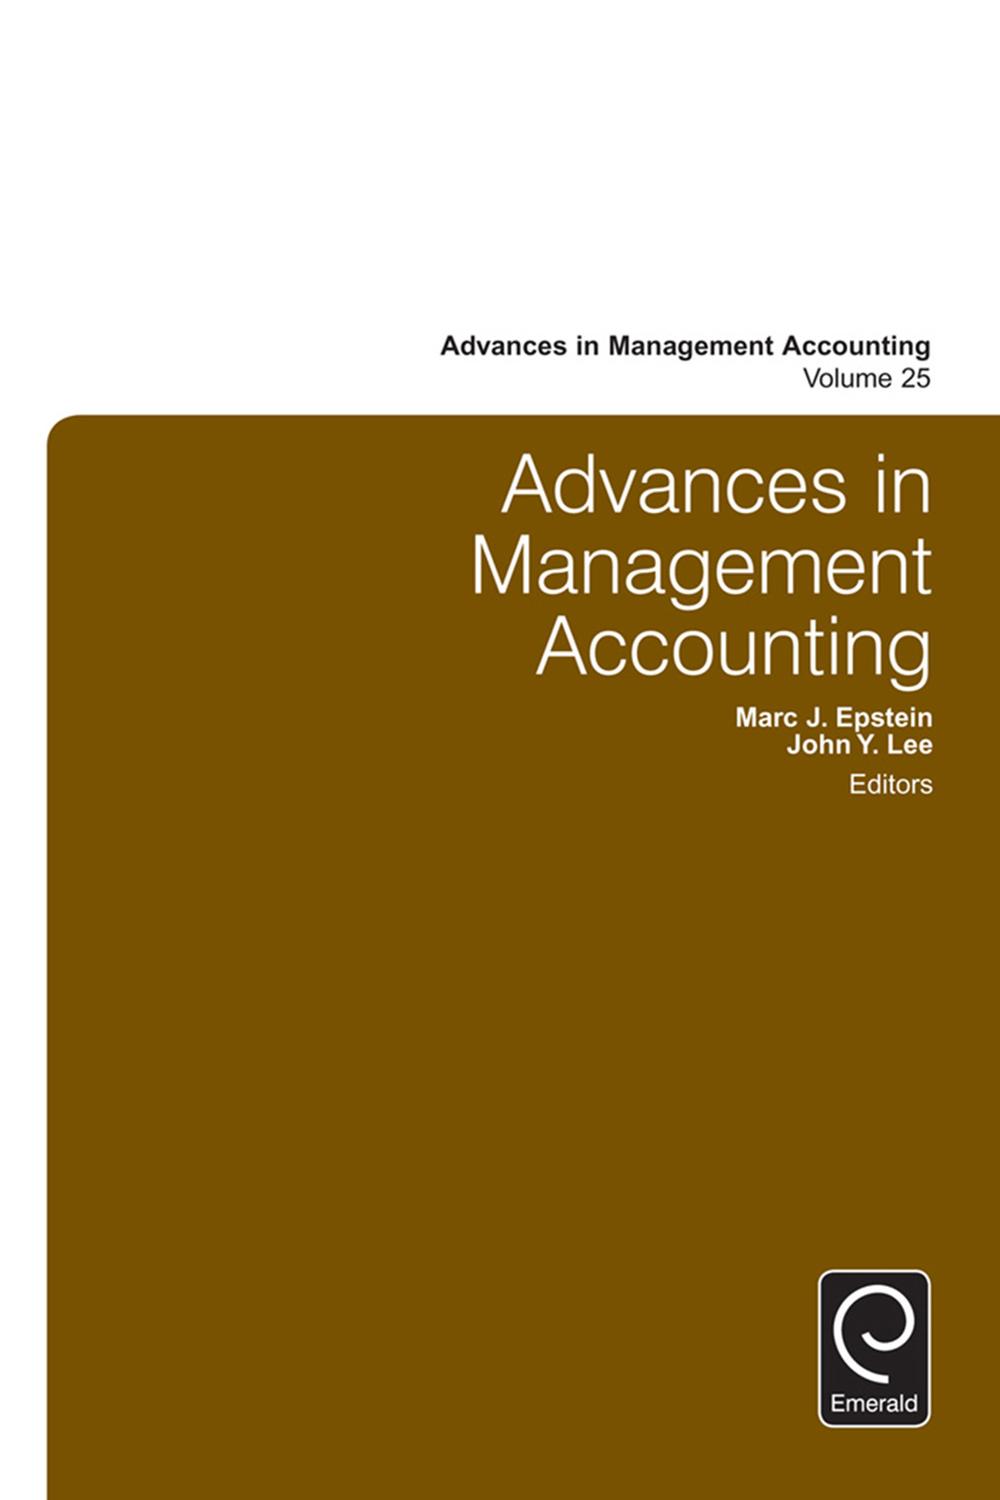 Advances in Management Accounting - Marc J. Epstein, John Y. Lee